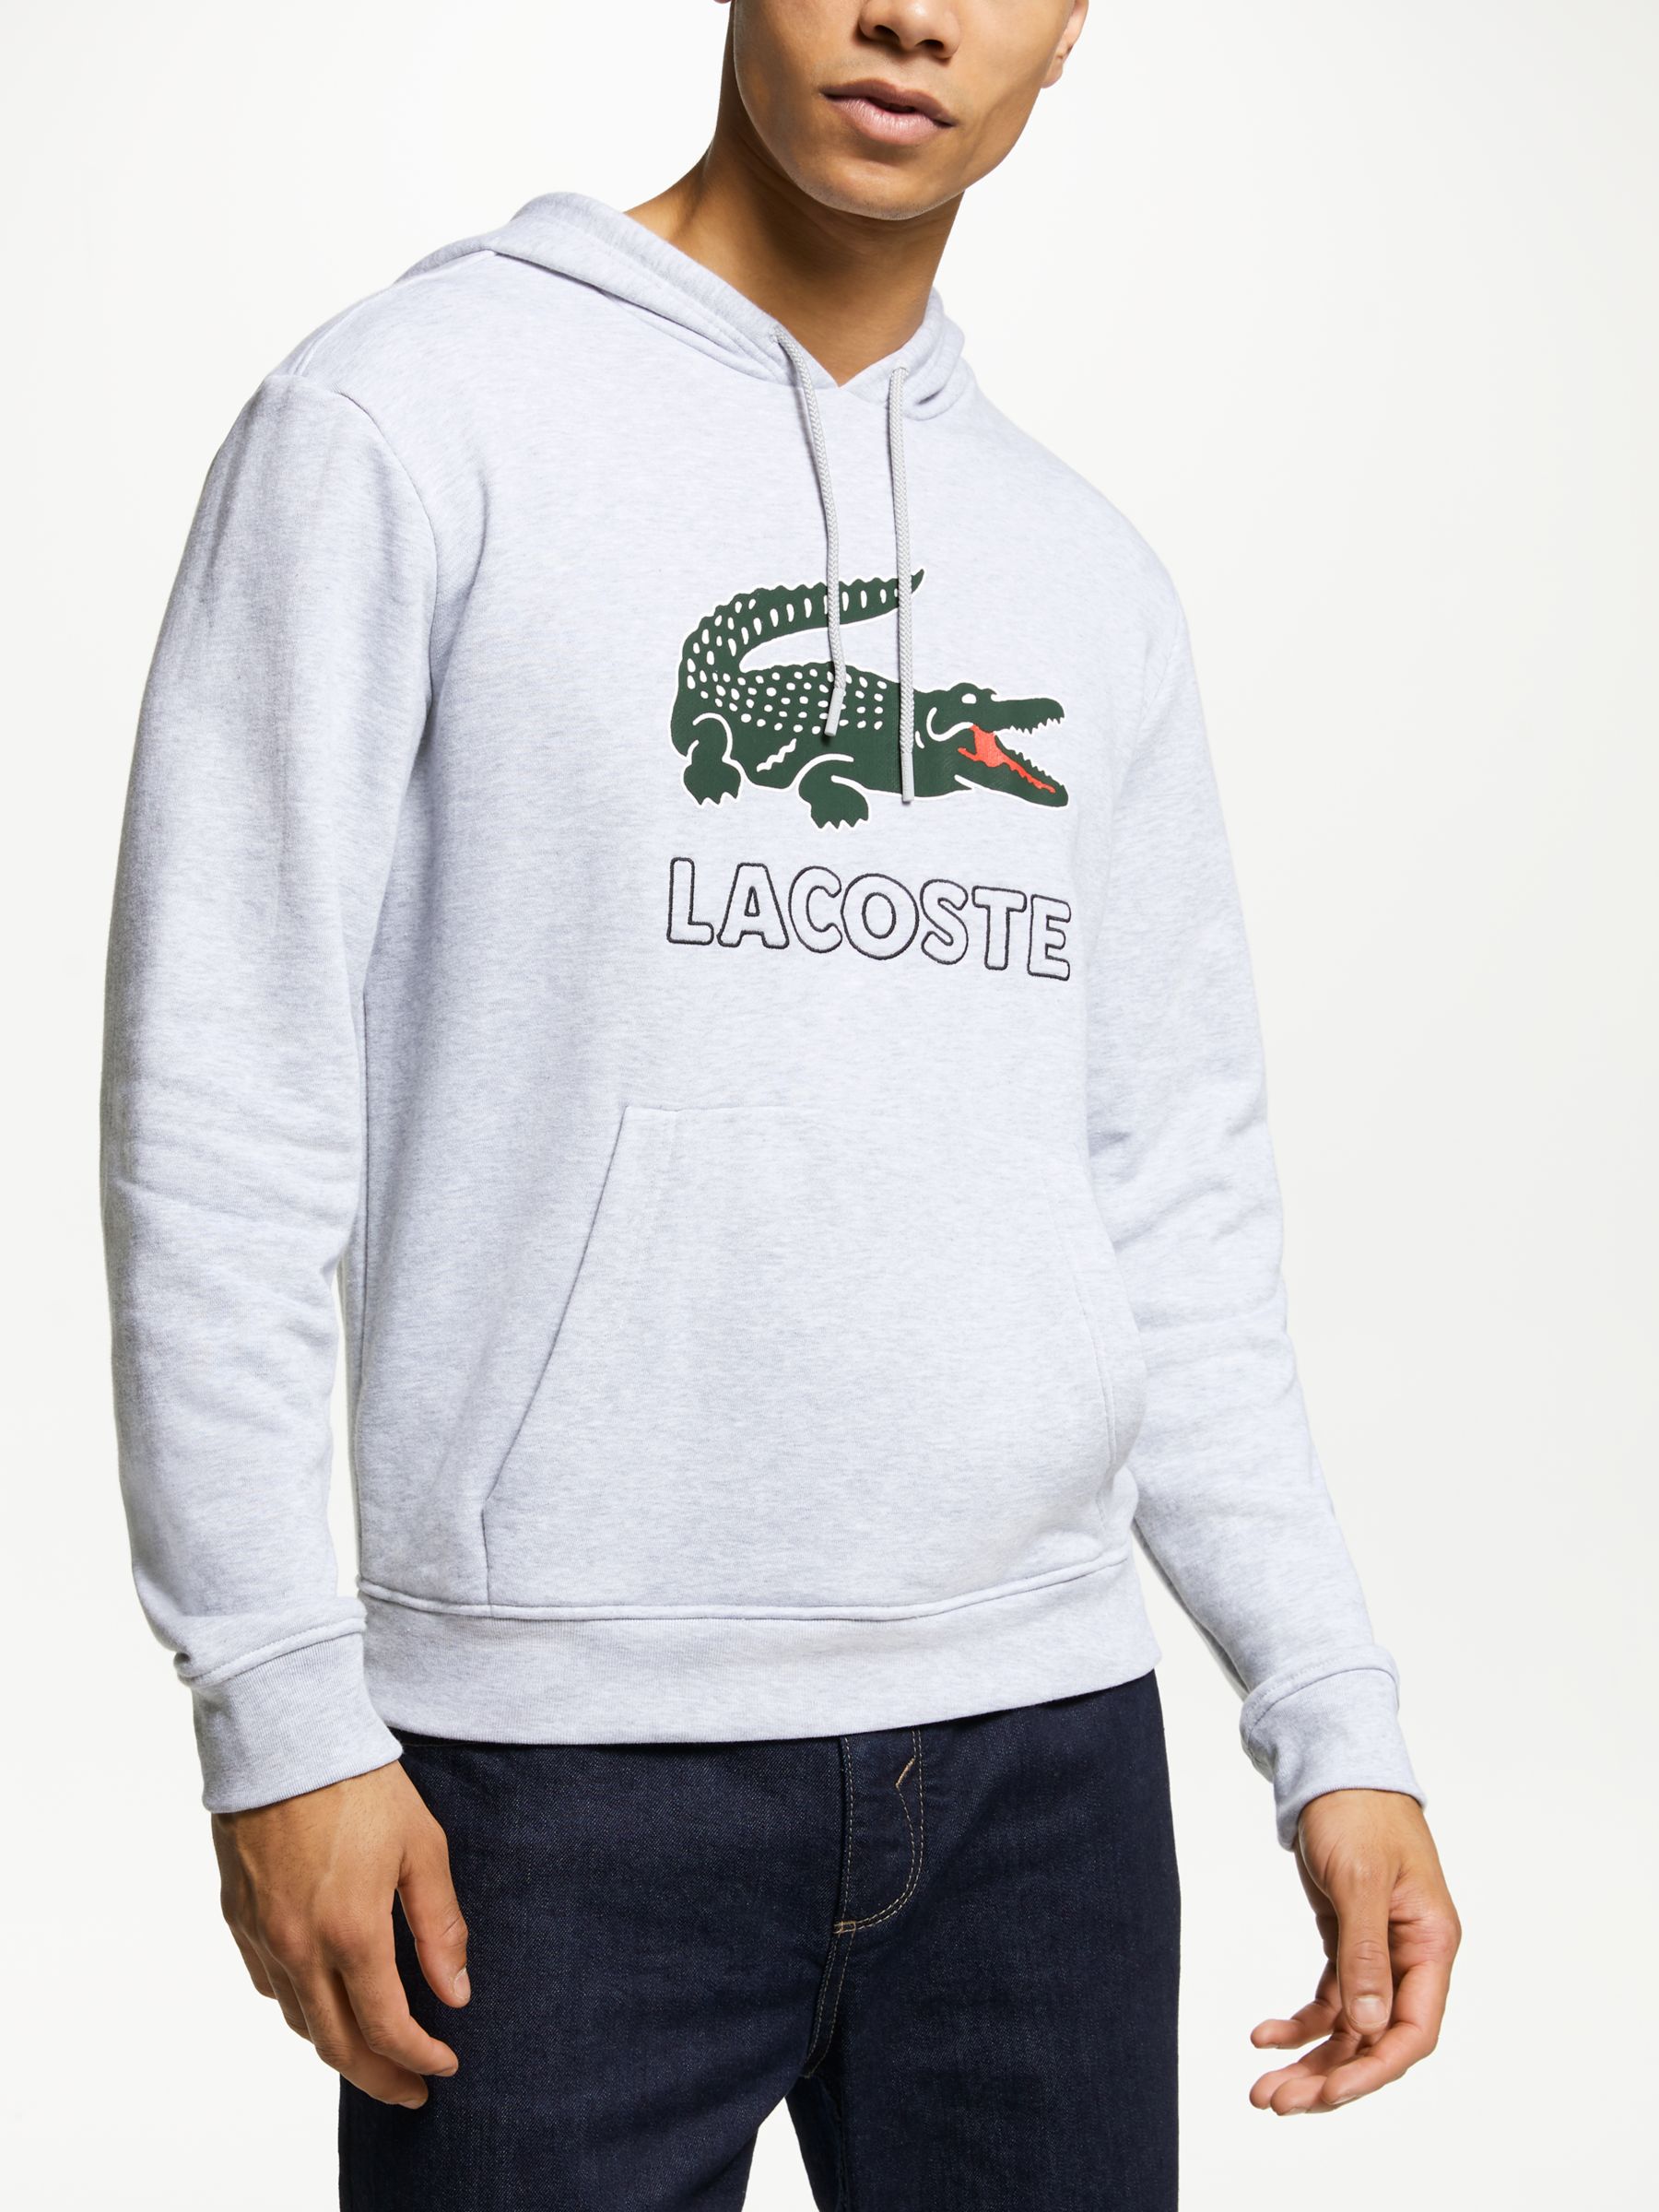 Lacoste Logo Hoodie, Argent Chine at John Lewis & Partners